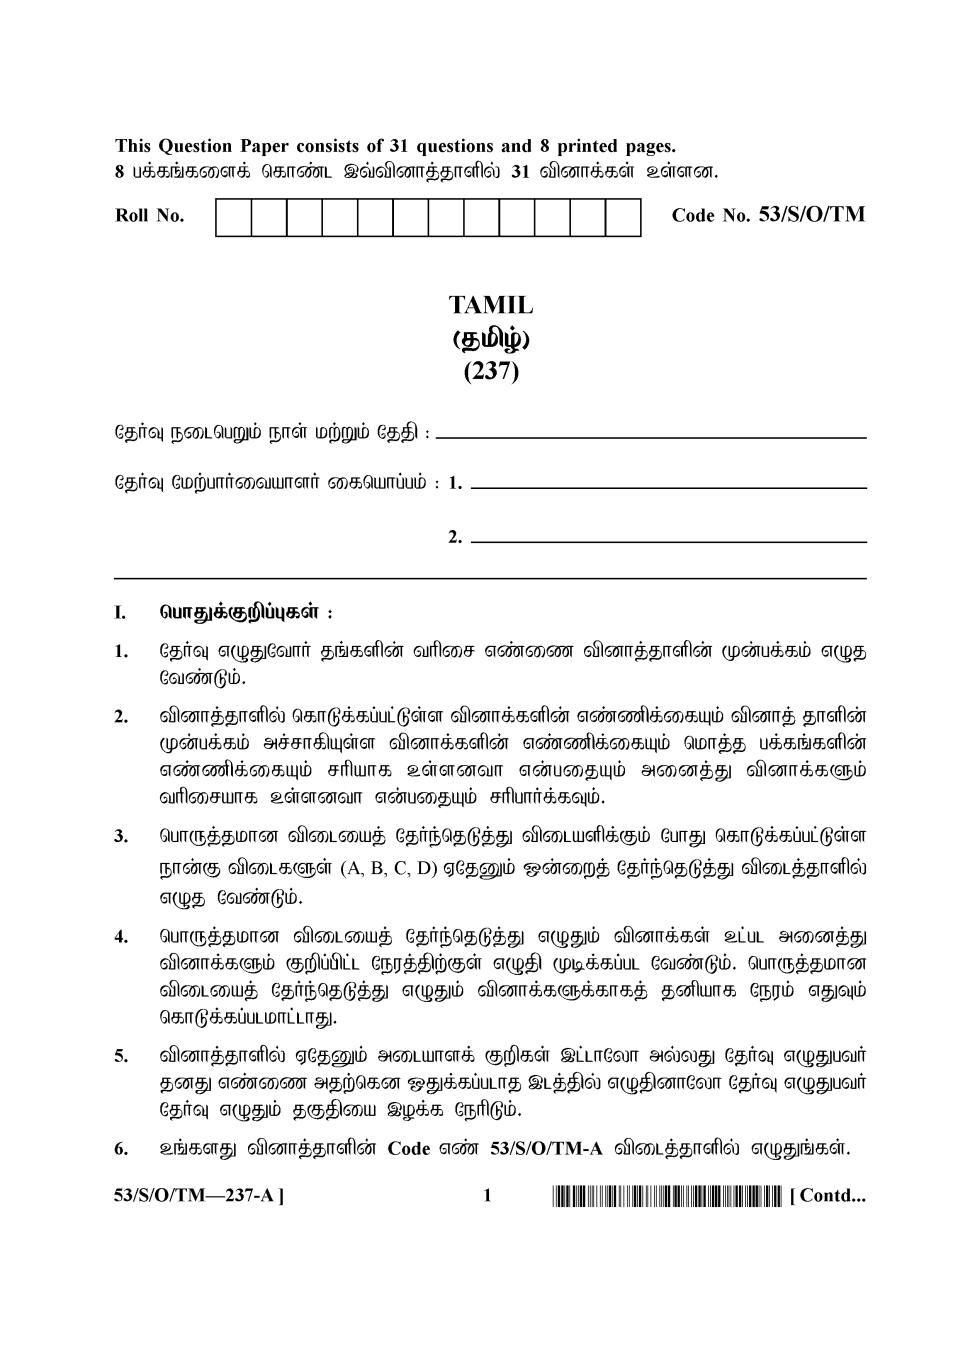 NIOS Class 10 Question Paper Oct 2016 - Tamil - Page 1